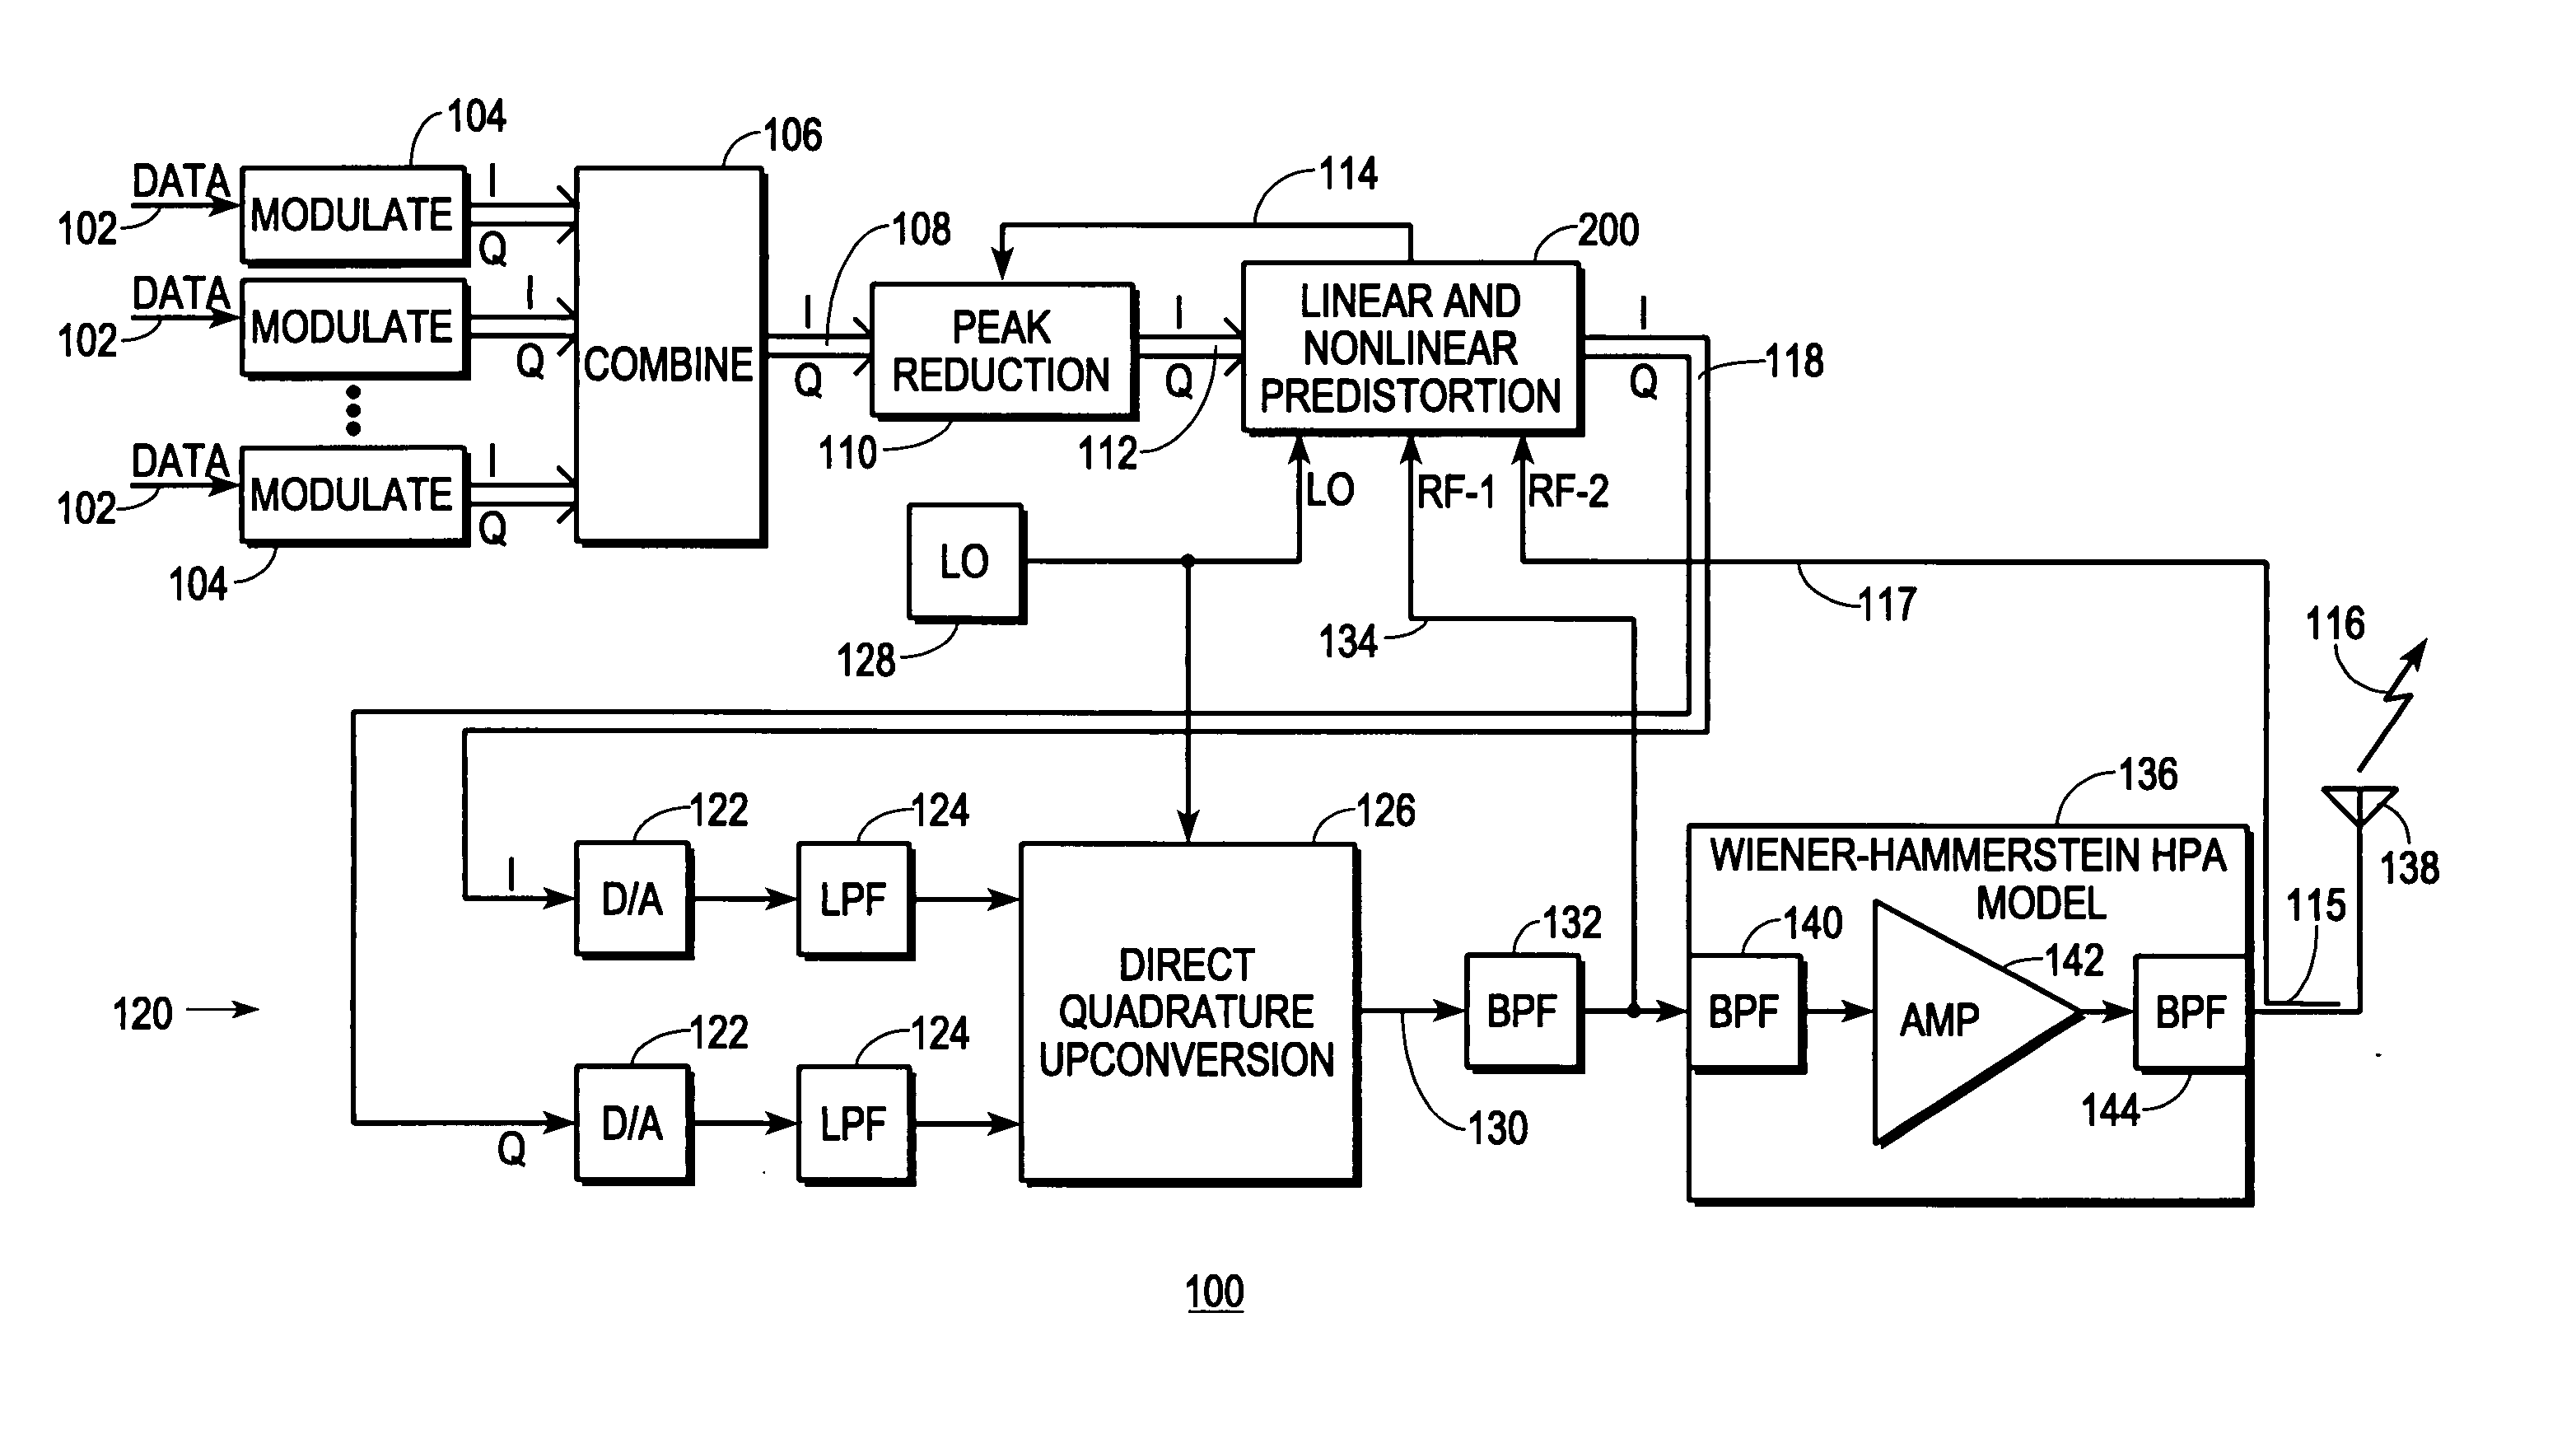 Predistortion circuit and method for compensating nonlinear distortion in a digital RF communications transmitter